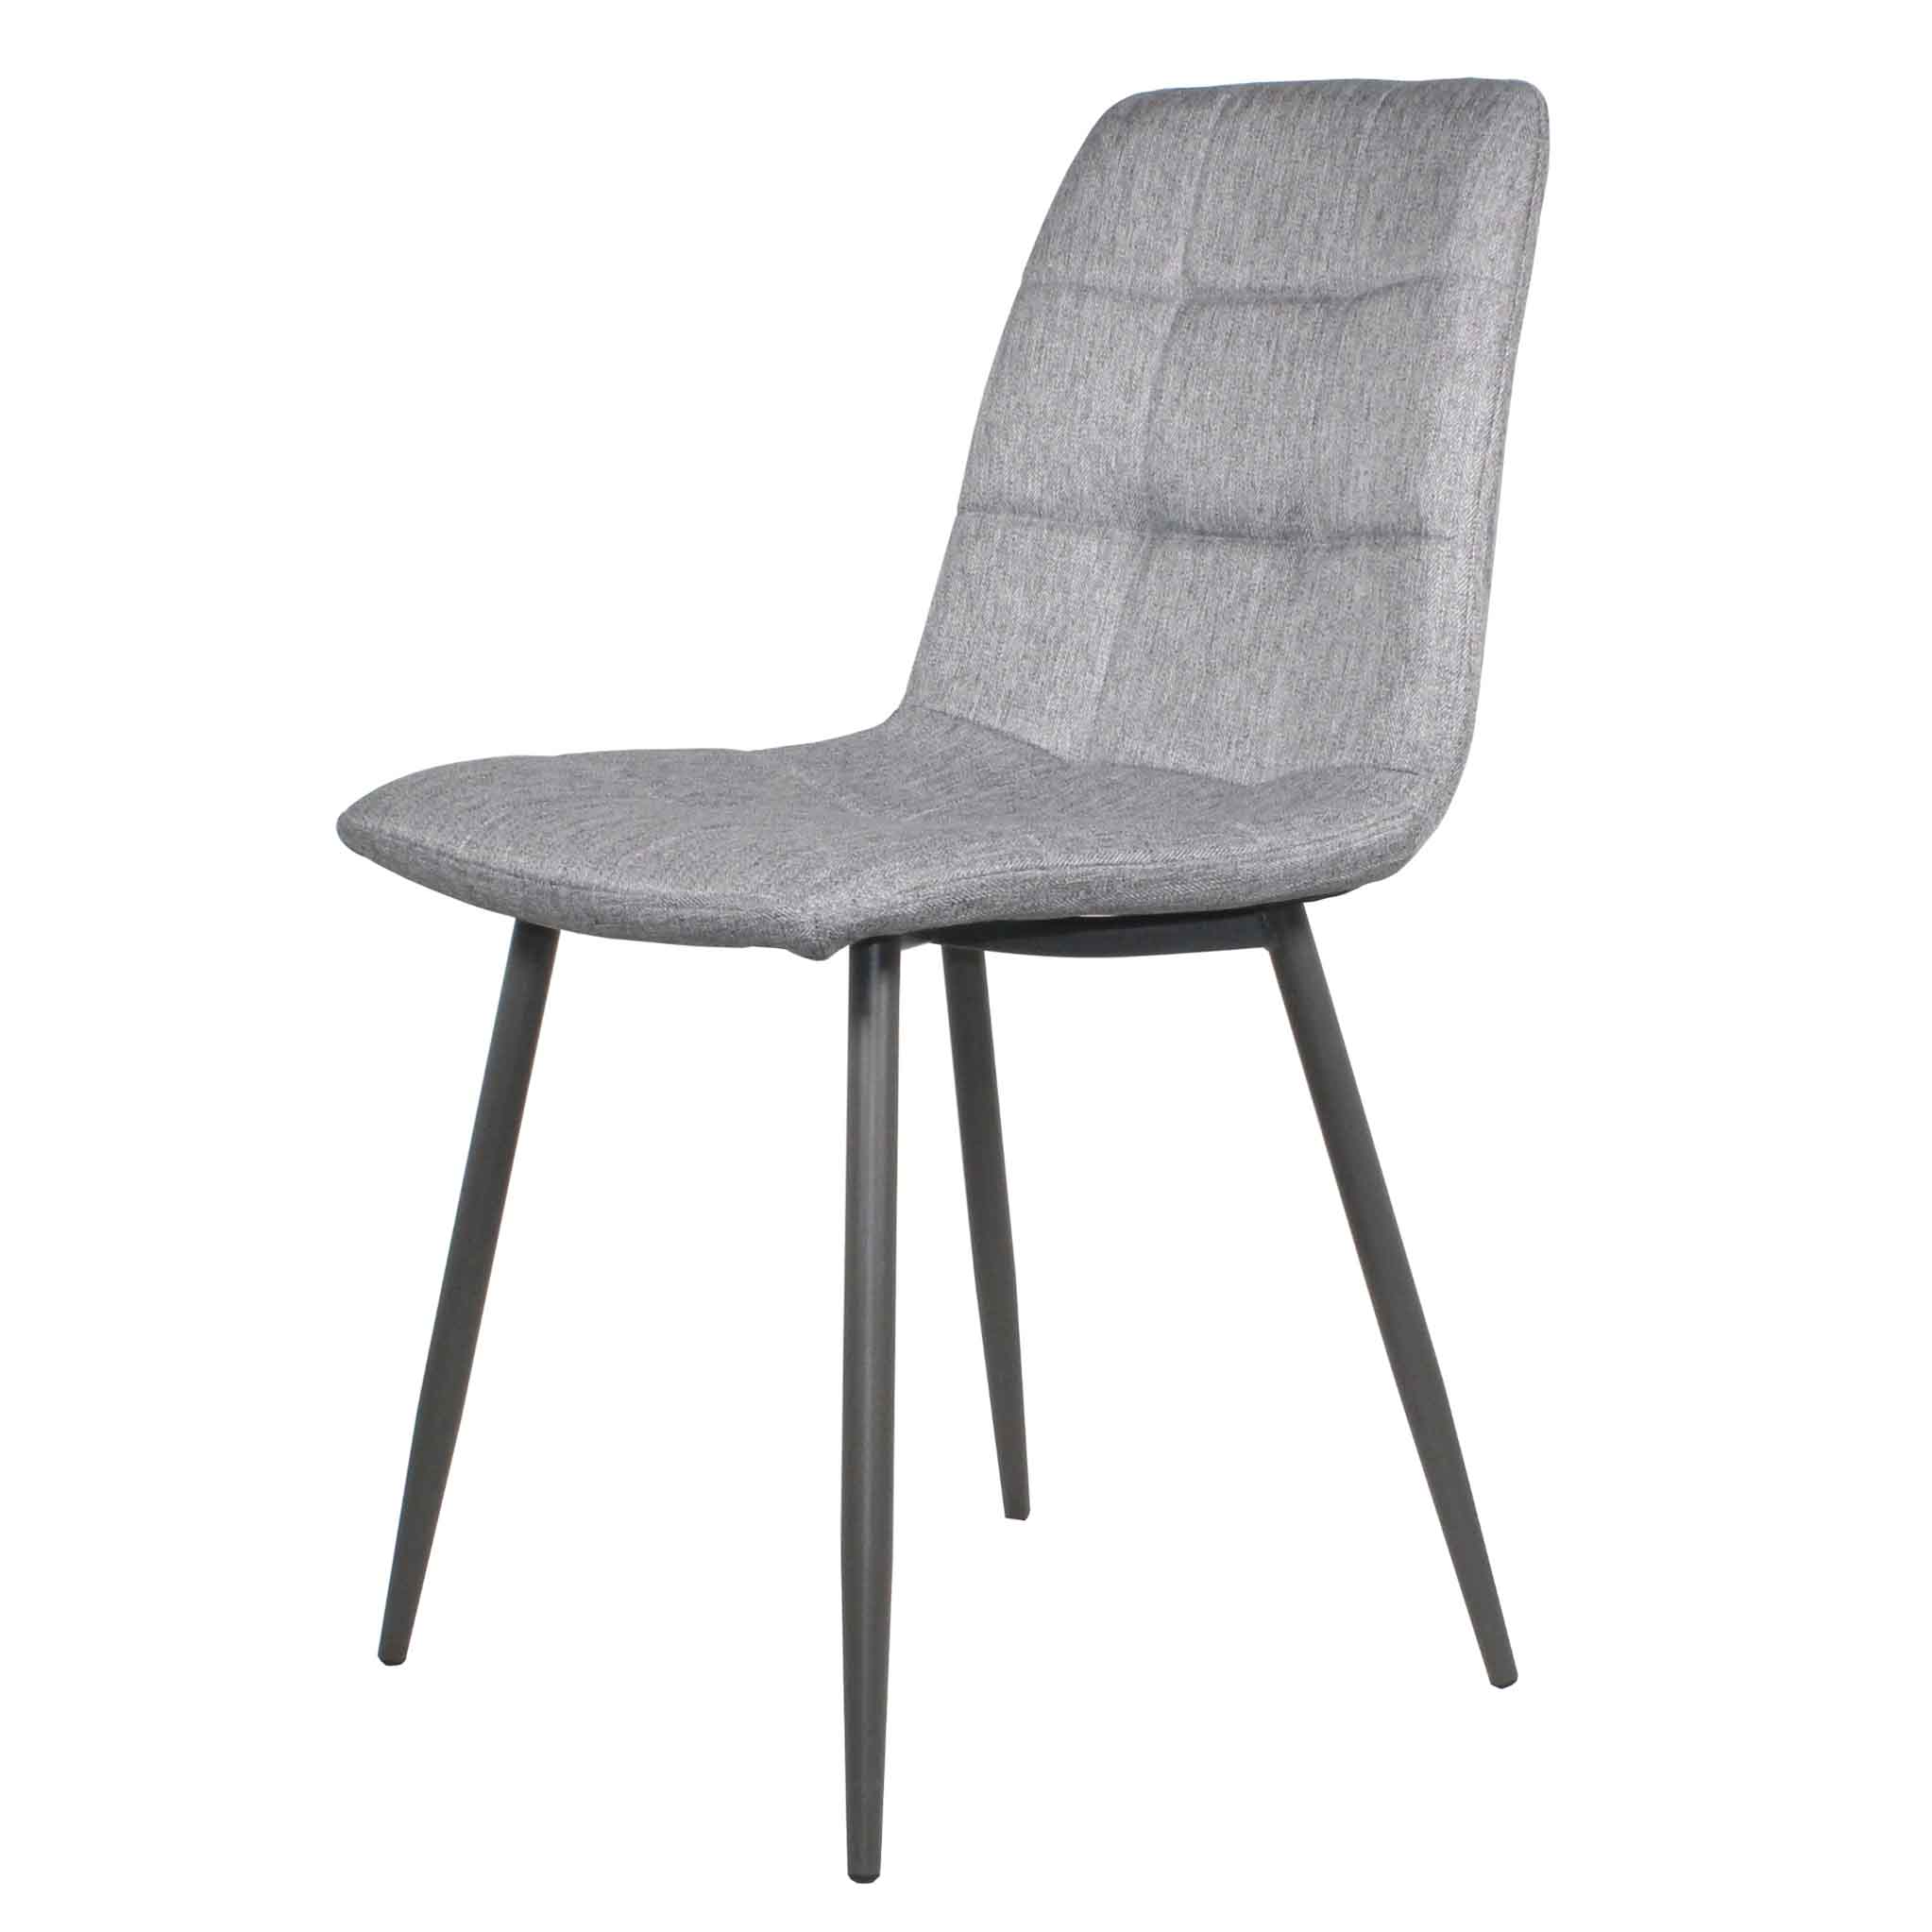 Olivia Comfy Padded Contemporary Dining Chair